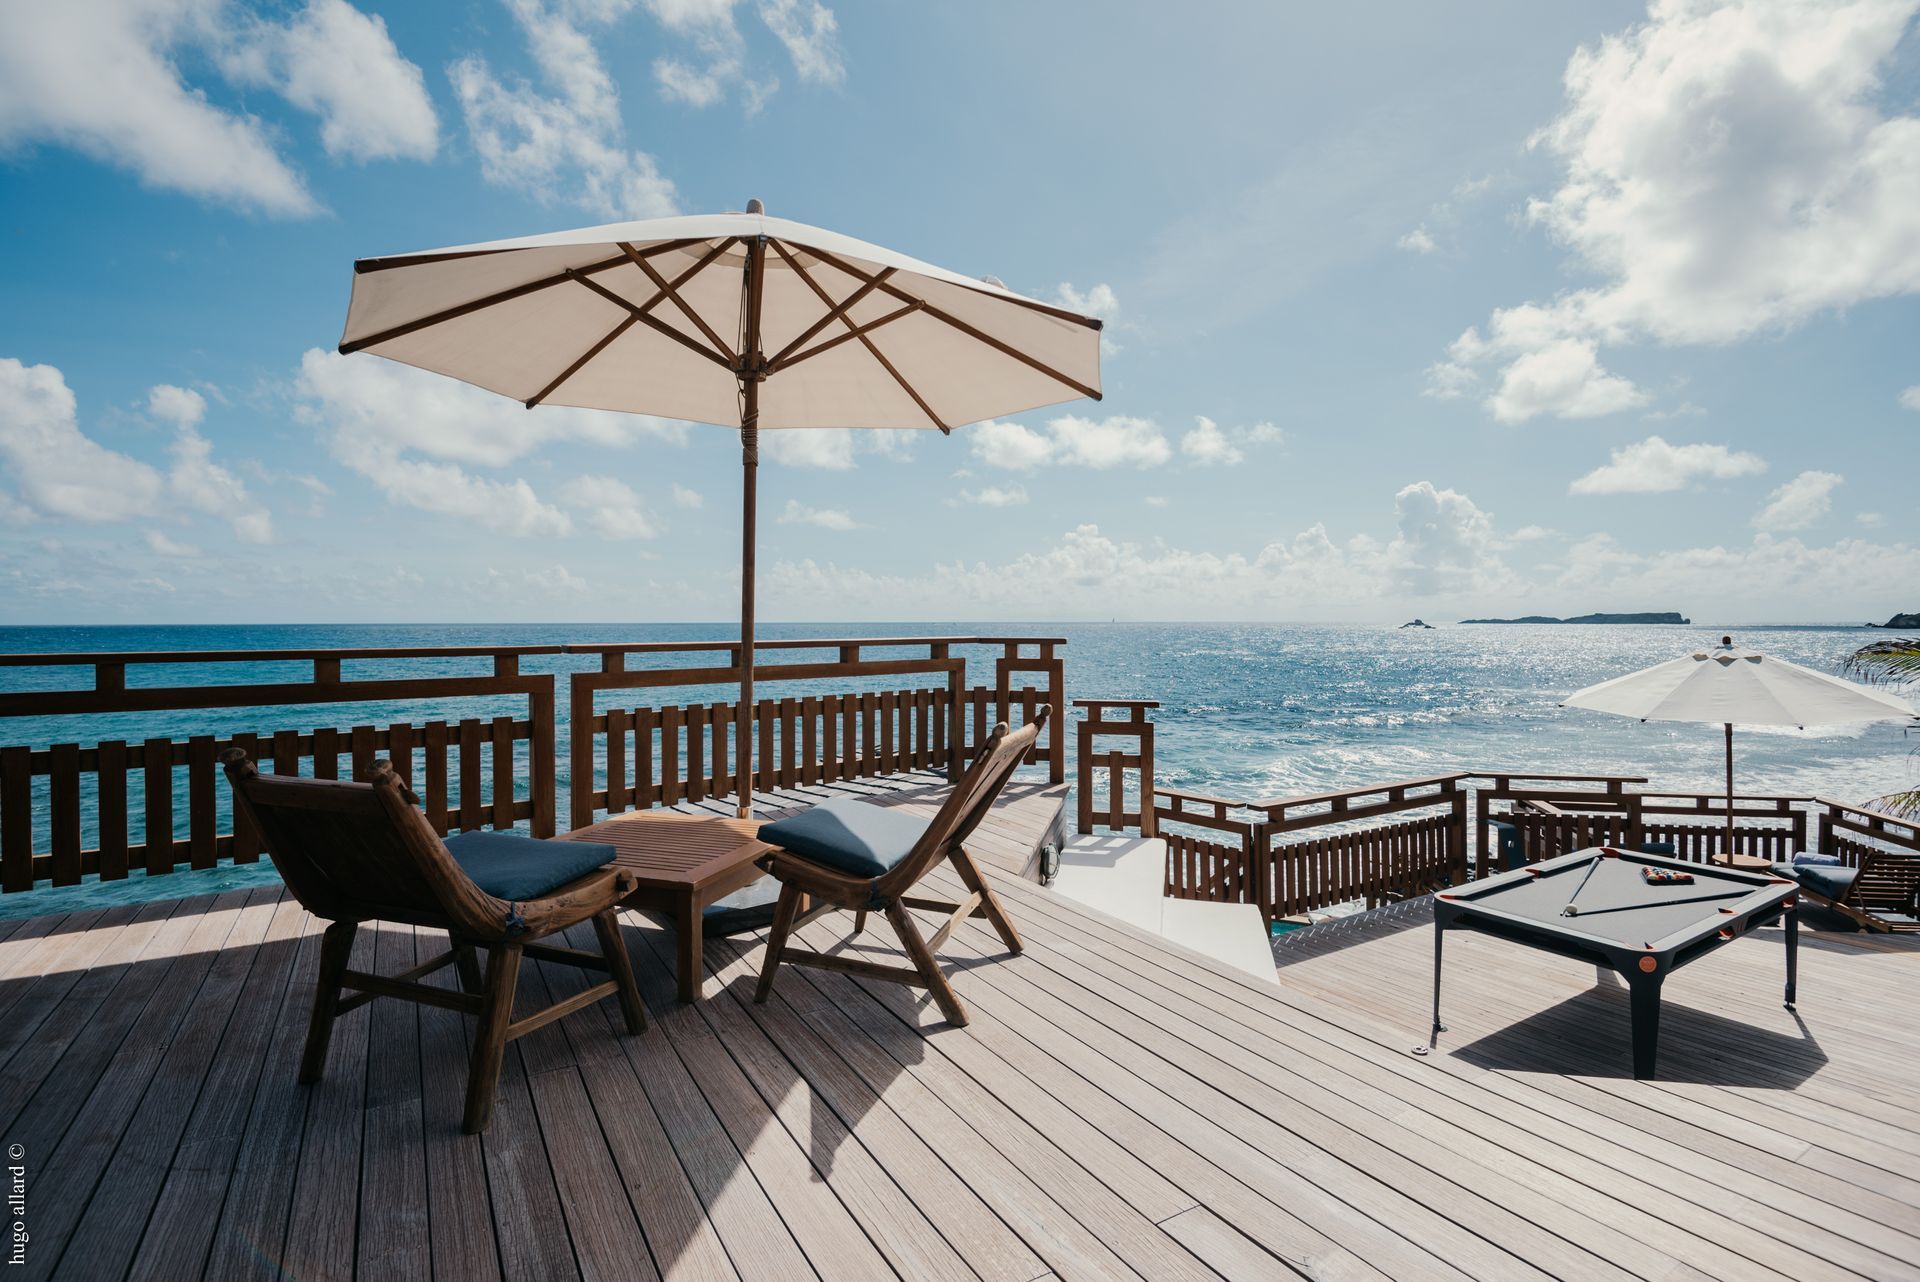 a deck with chairs and umbrellas overlooking the ocean